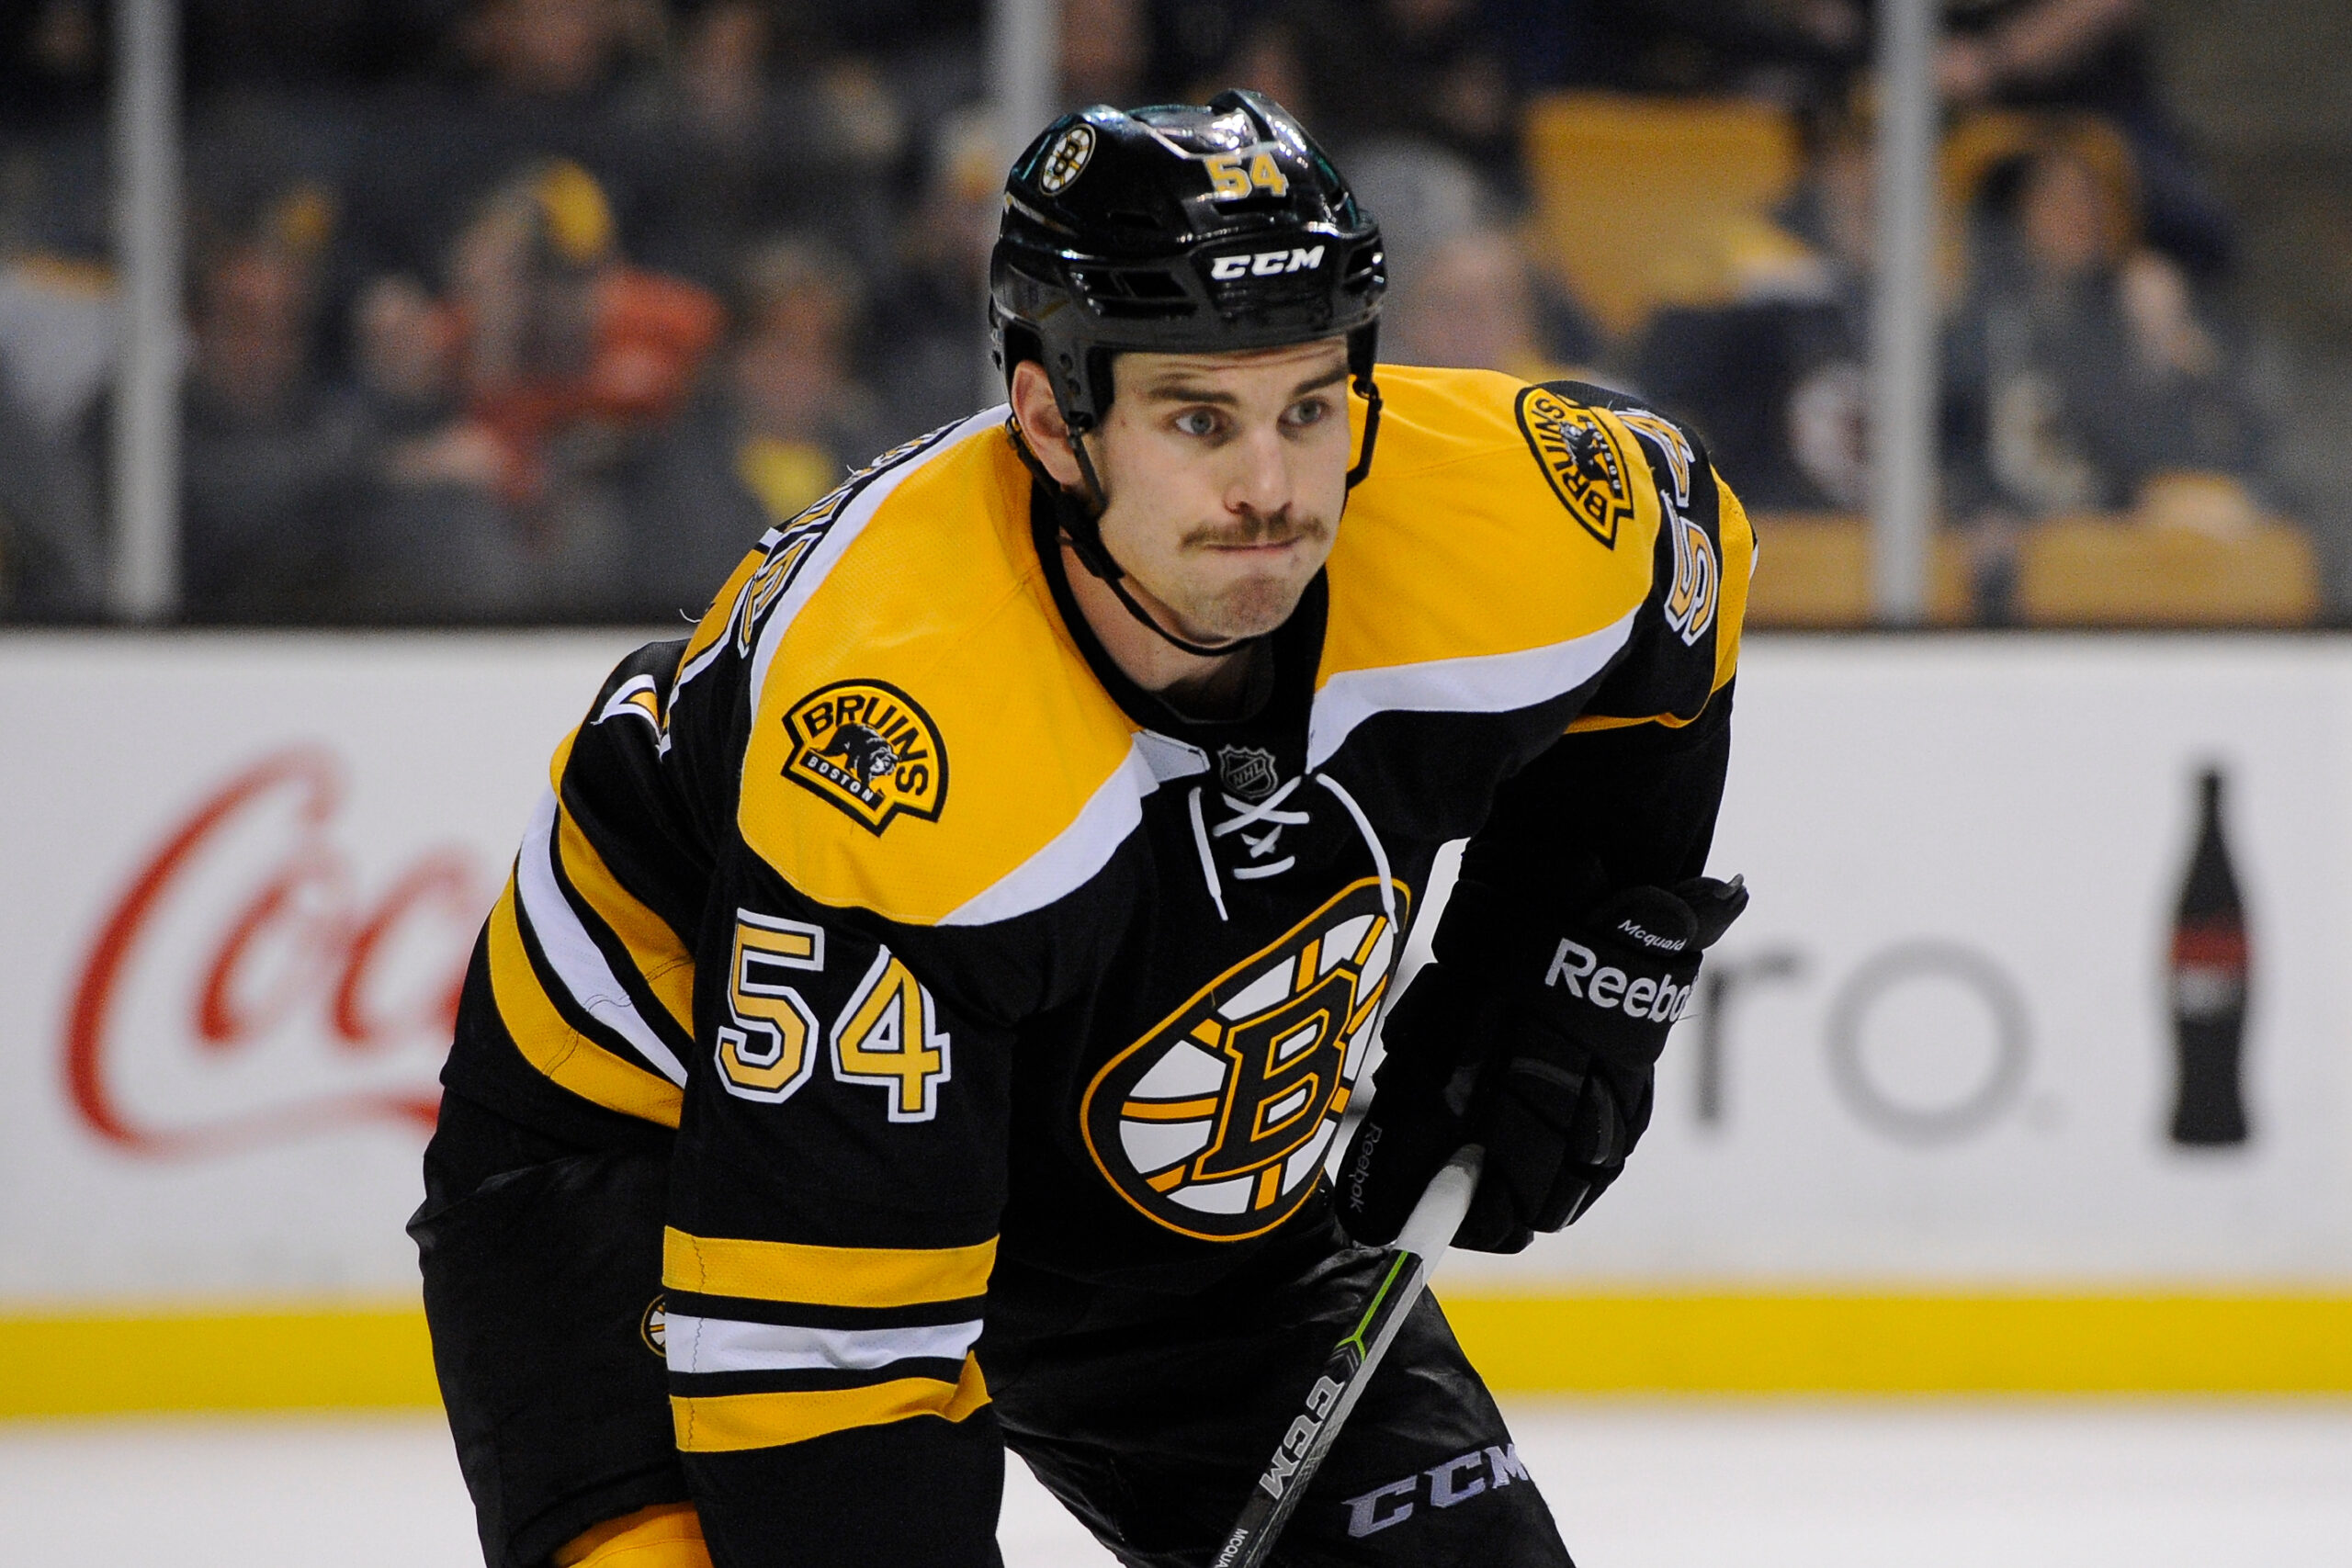 Is McQuaid’s Time in Boston Nearing Its End?